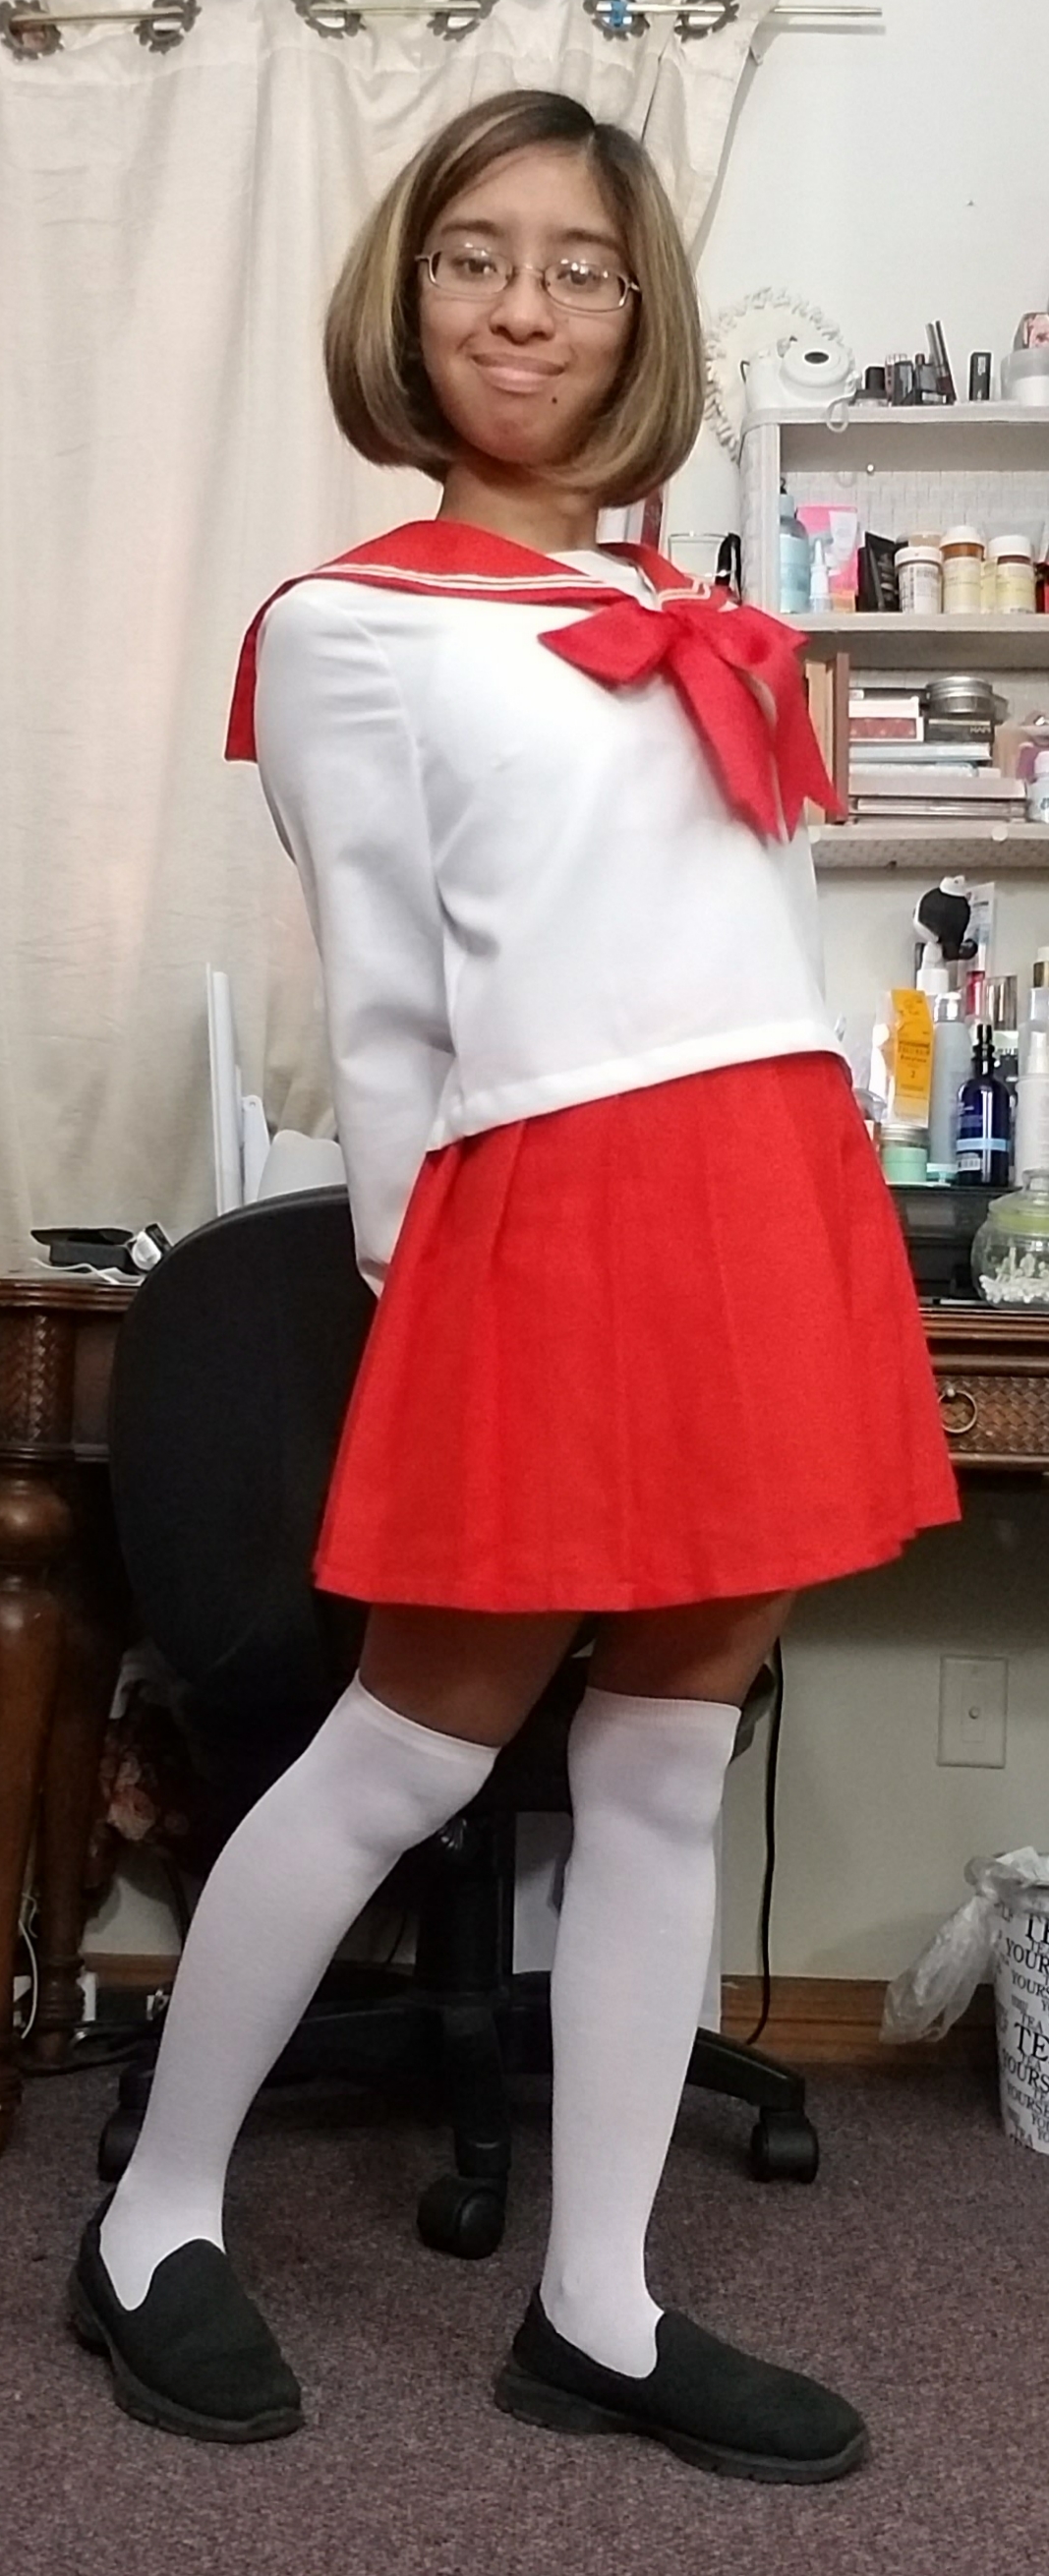 Me in a red Anime school girl uniform photo 5 by BerryViolet on DeviantArt